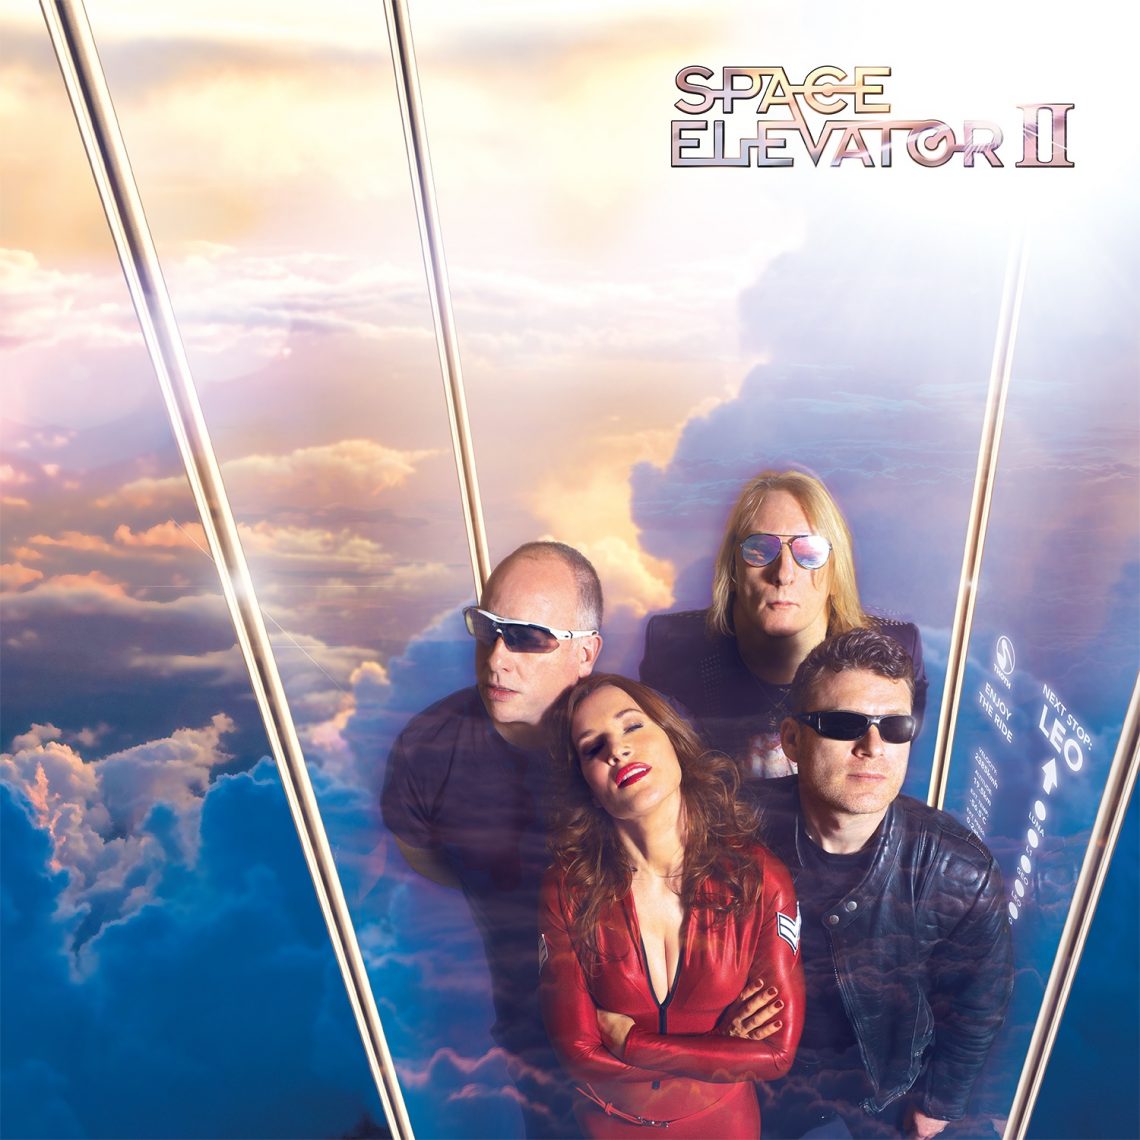 SPACE ELEVATOR  ***New album teaser released today, tour dates with Russ Ballard confirmed ***